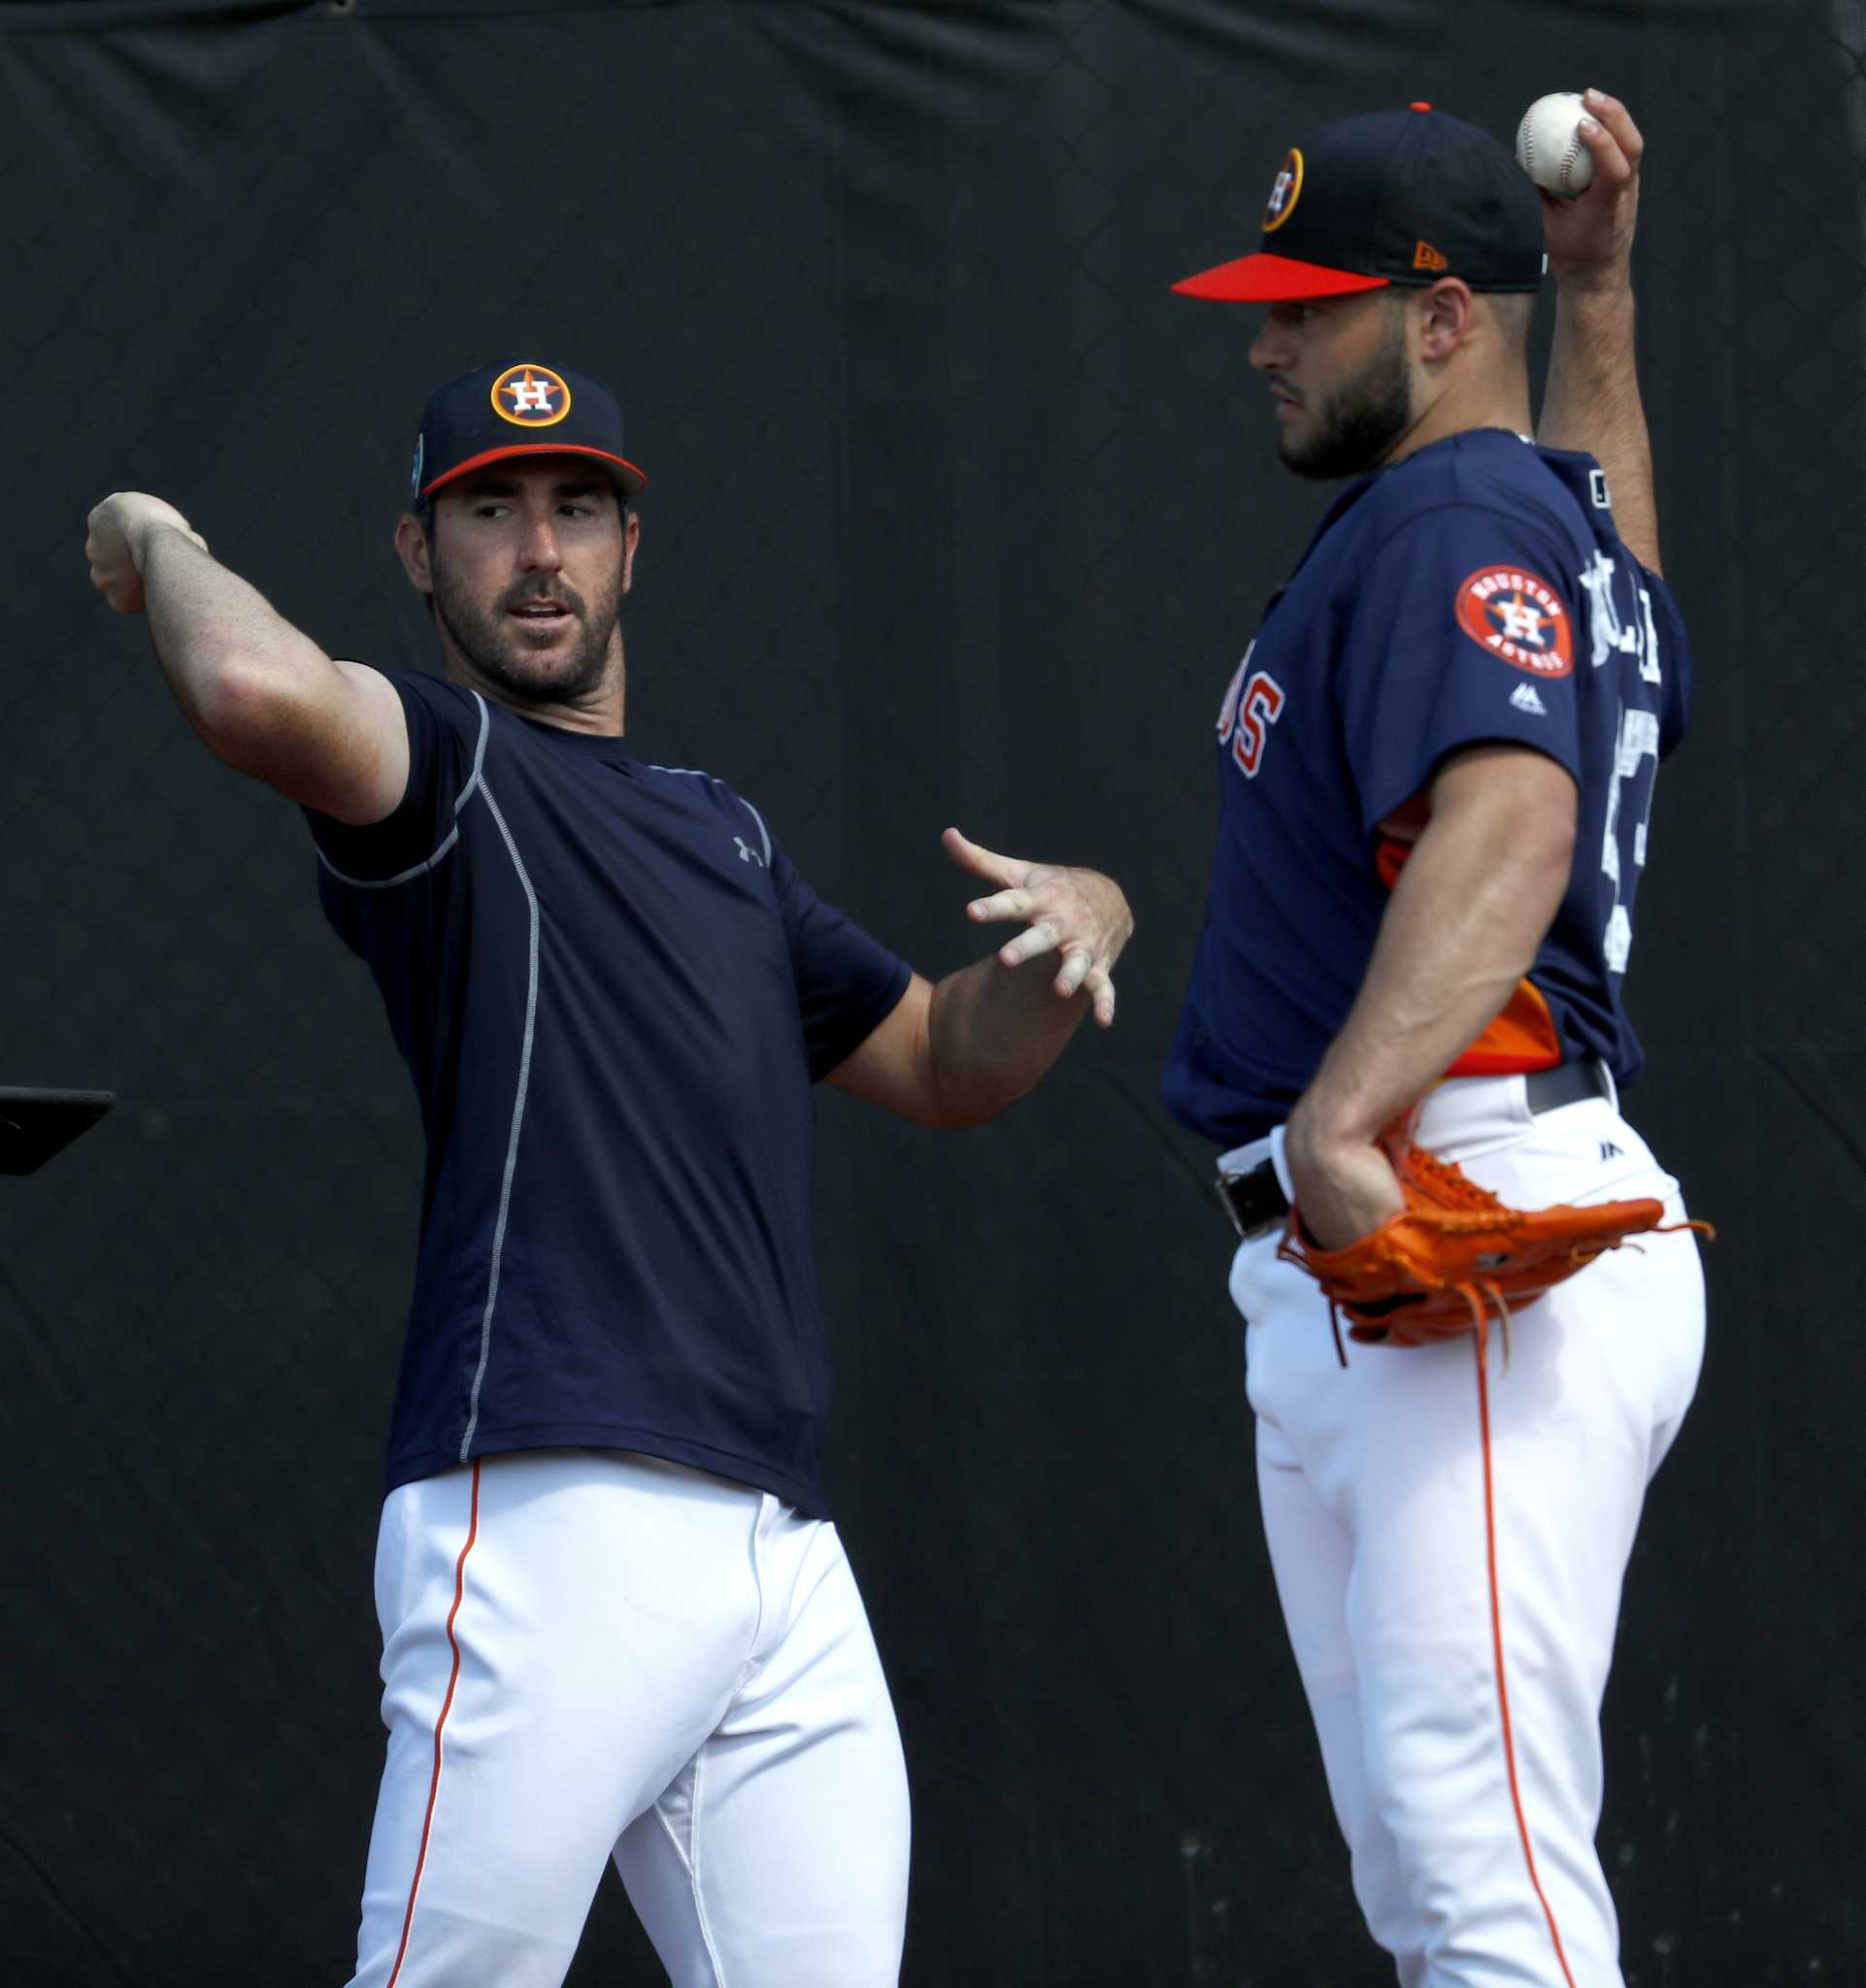 Houston Astros pitcher Lance McCullers Jr. (43) signs a fan's